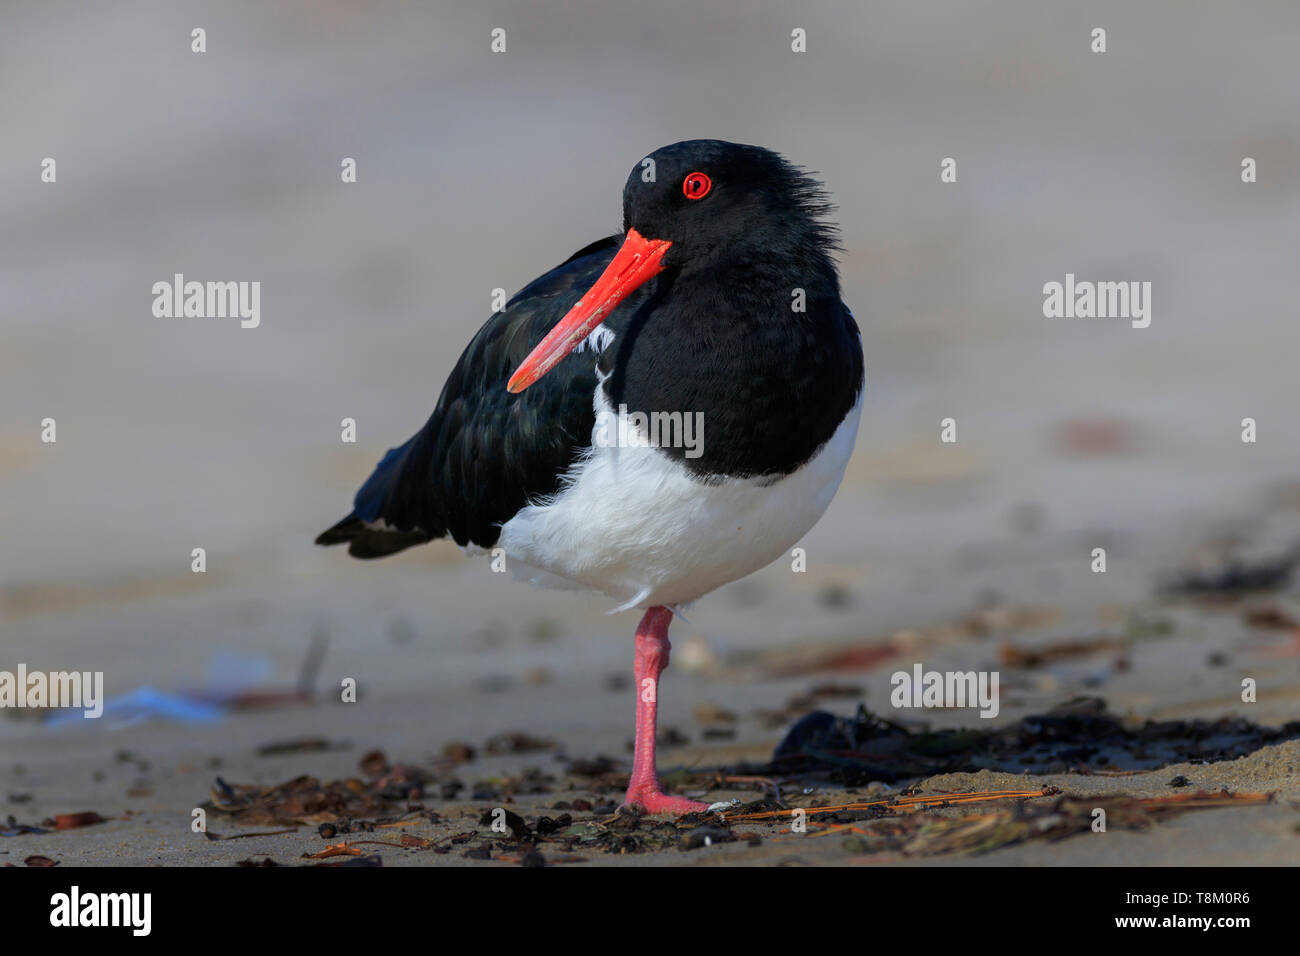 Pied Oystercatcher, Haematopus longirostris, shorebird with black and white feathers and long orange beak standing on one foot on a beach near Hasting Stock Photo